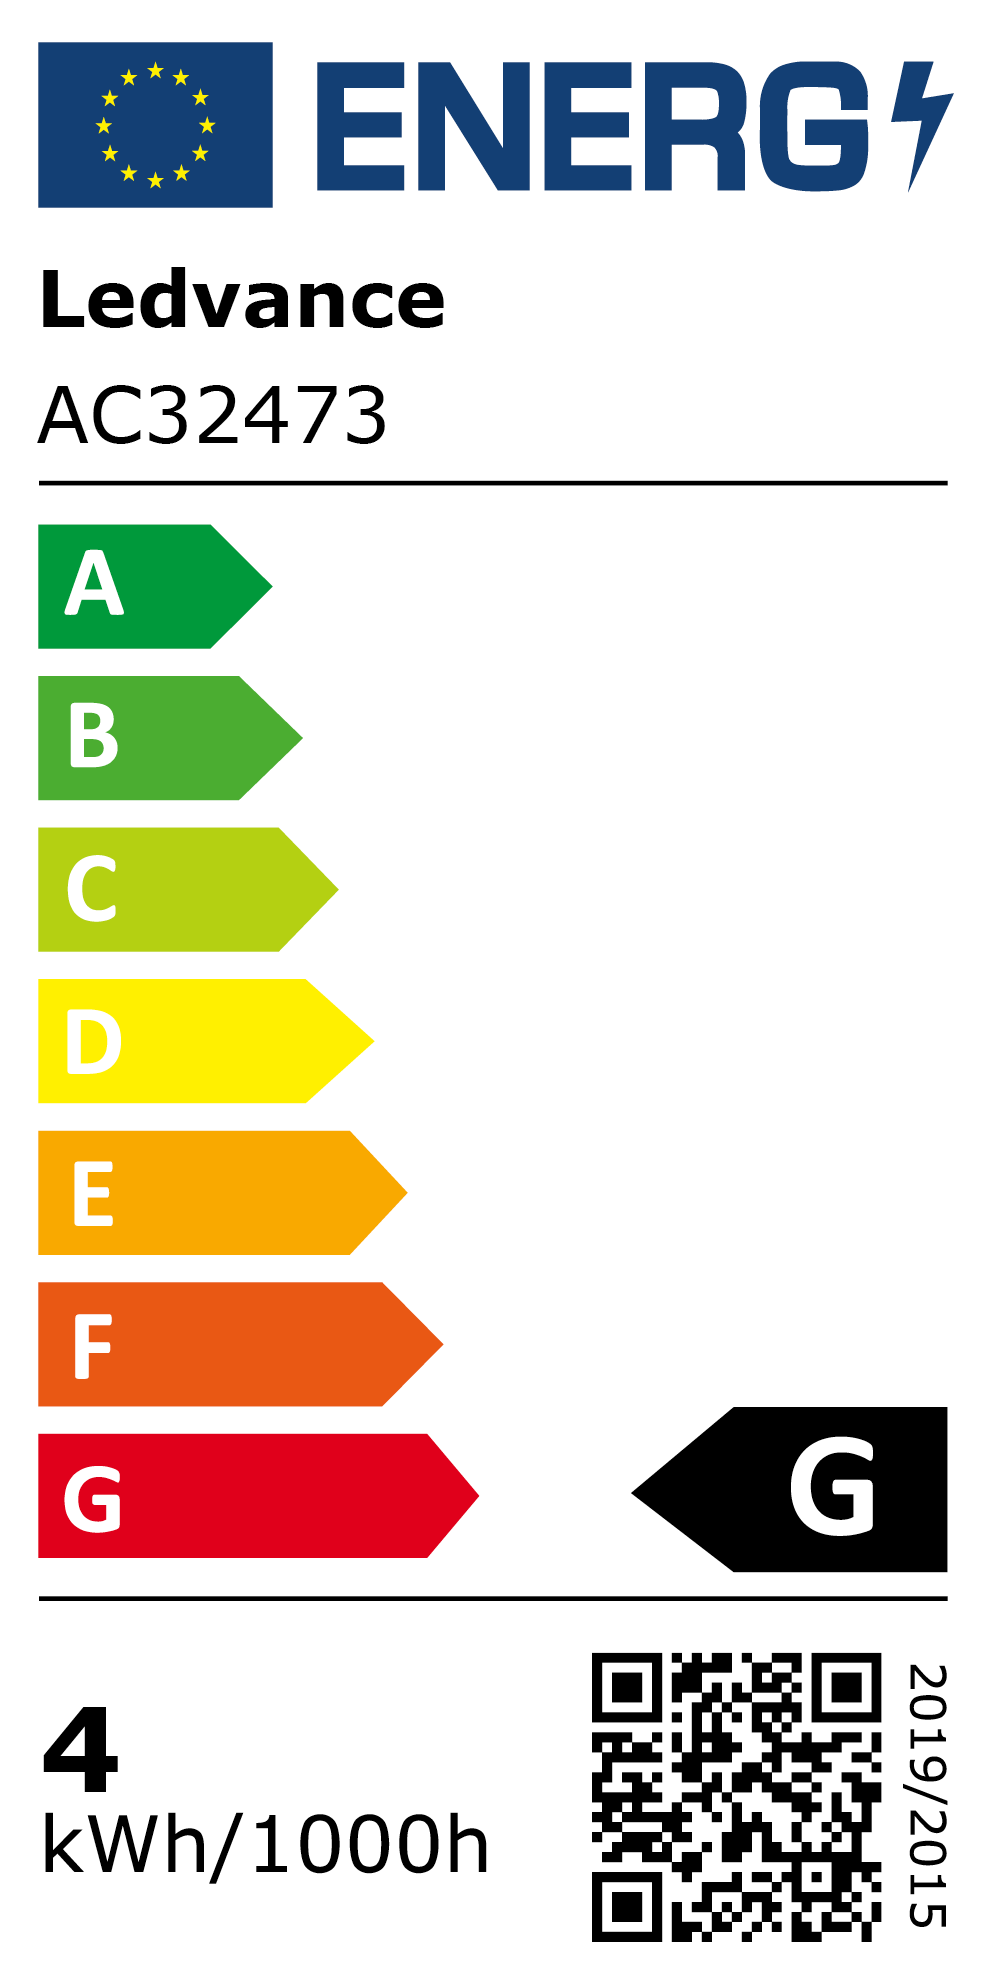 New 2021 Energy Rating Label: MPN AC32473